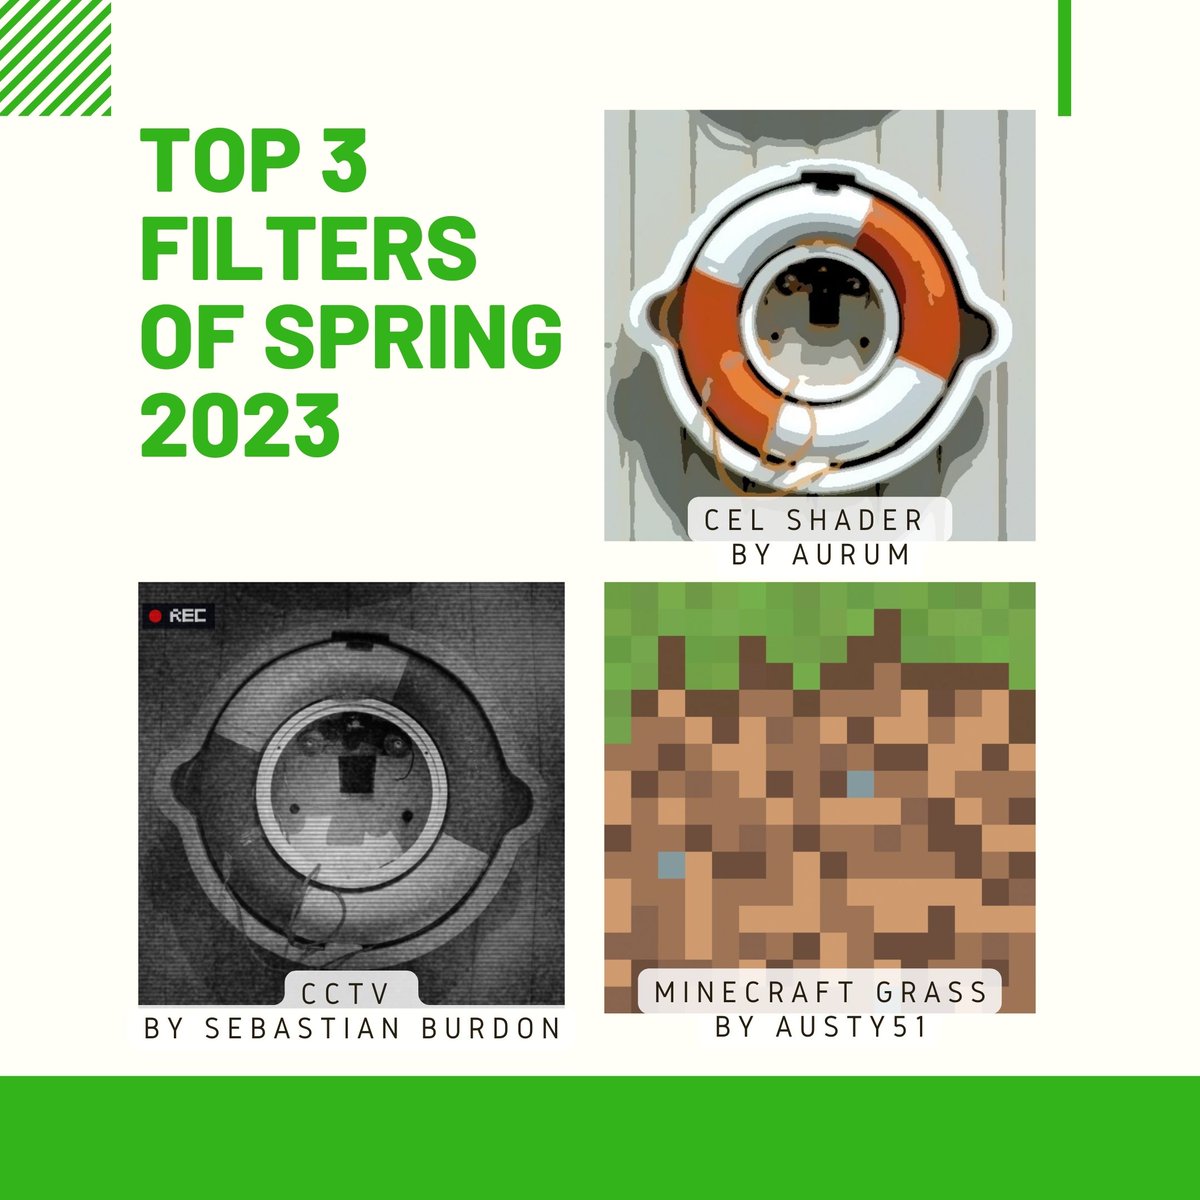 Top 3 filters of Spring 2023

#1 Cel Shader by Aurum
filterforge.com/filters/4884.h…

#2 CCTV by Sebastian Burdon
filterforge.com/filters/10913.…

#3 Minecraft Grass by Austy51
filterforge.com/filters/11635.…

#filterforge #Minecrafttexture #animation #celshading #cctveffect